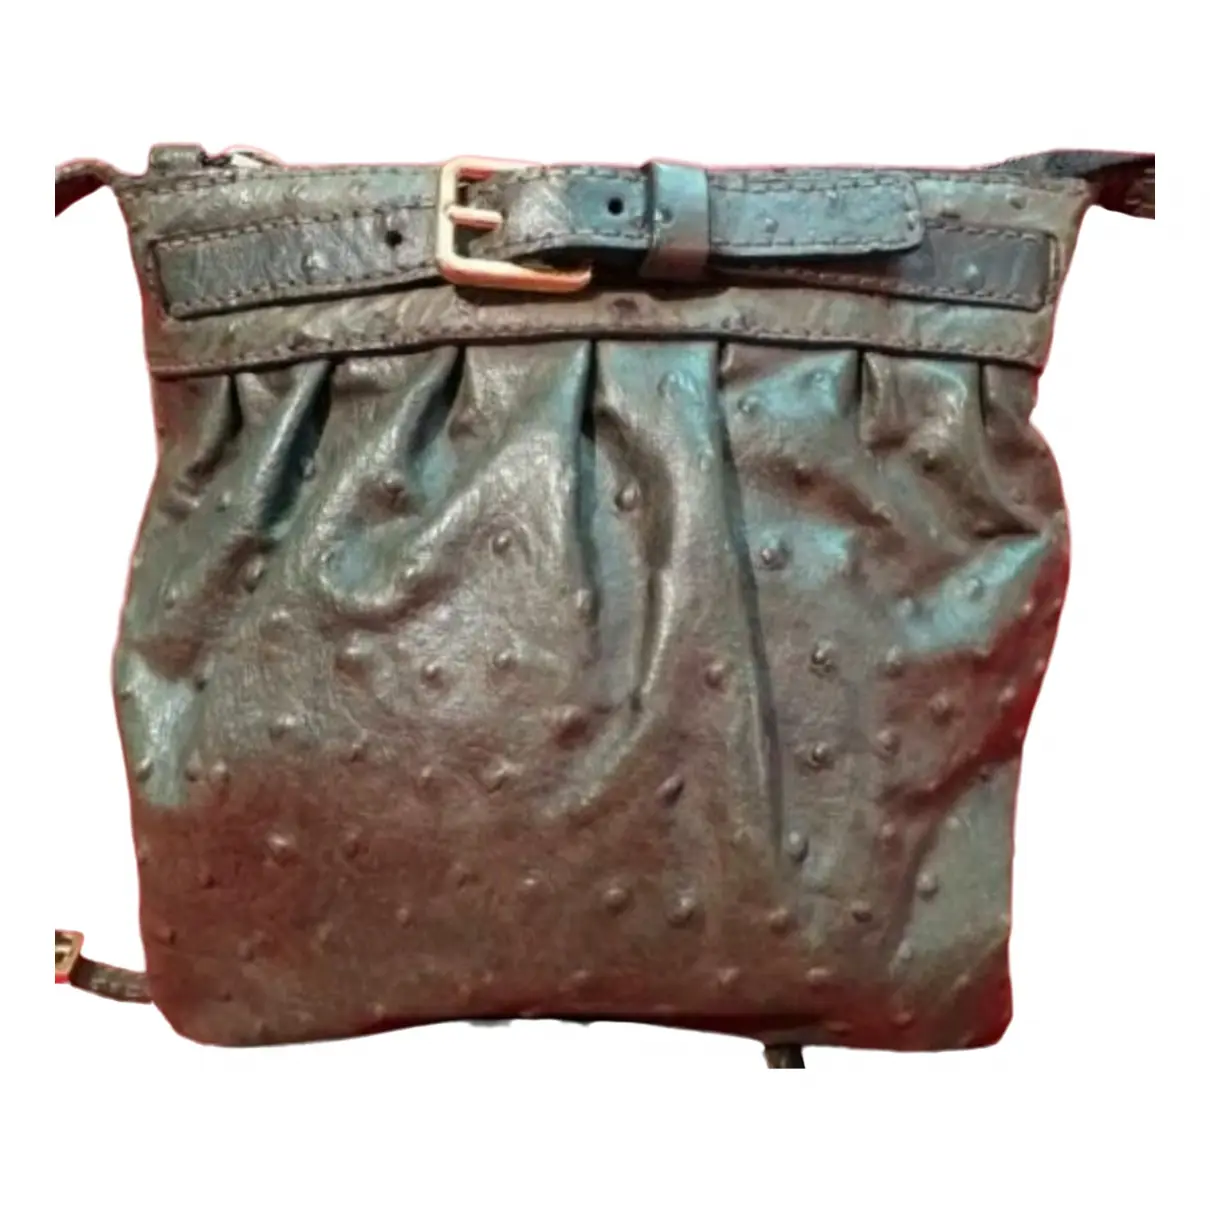 Leather crossbody bag Coccinelle